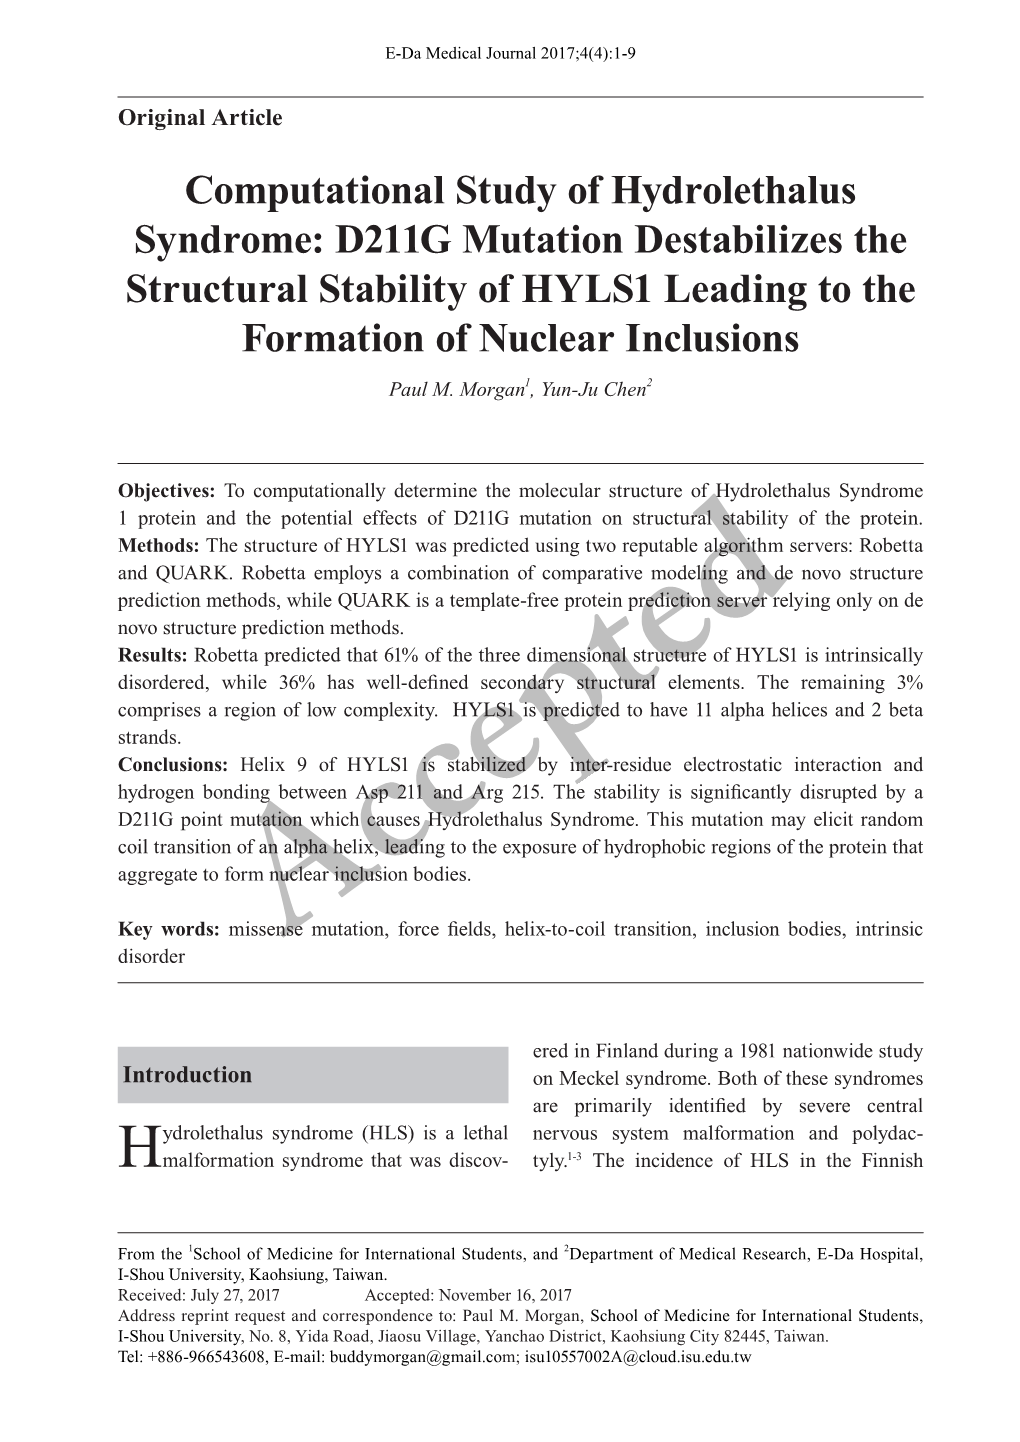 Computational Study of Hydrolethalus Syndrome: D211G Mutation Destabilizes the Structural Stability of HYLS1 Leading to the Formation of Nuclear Inclusions Paul M